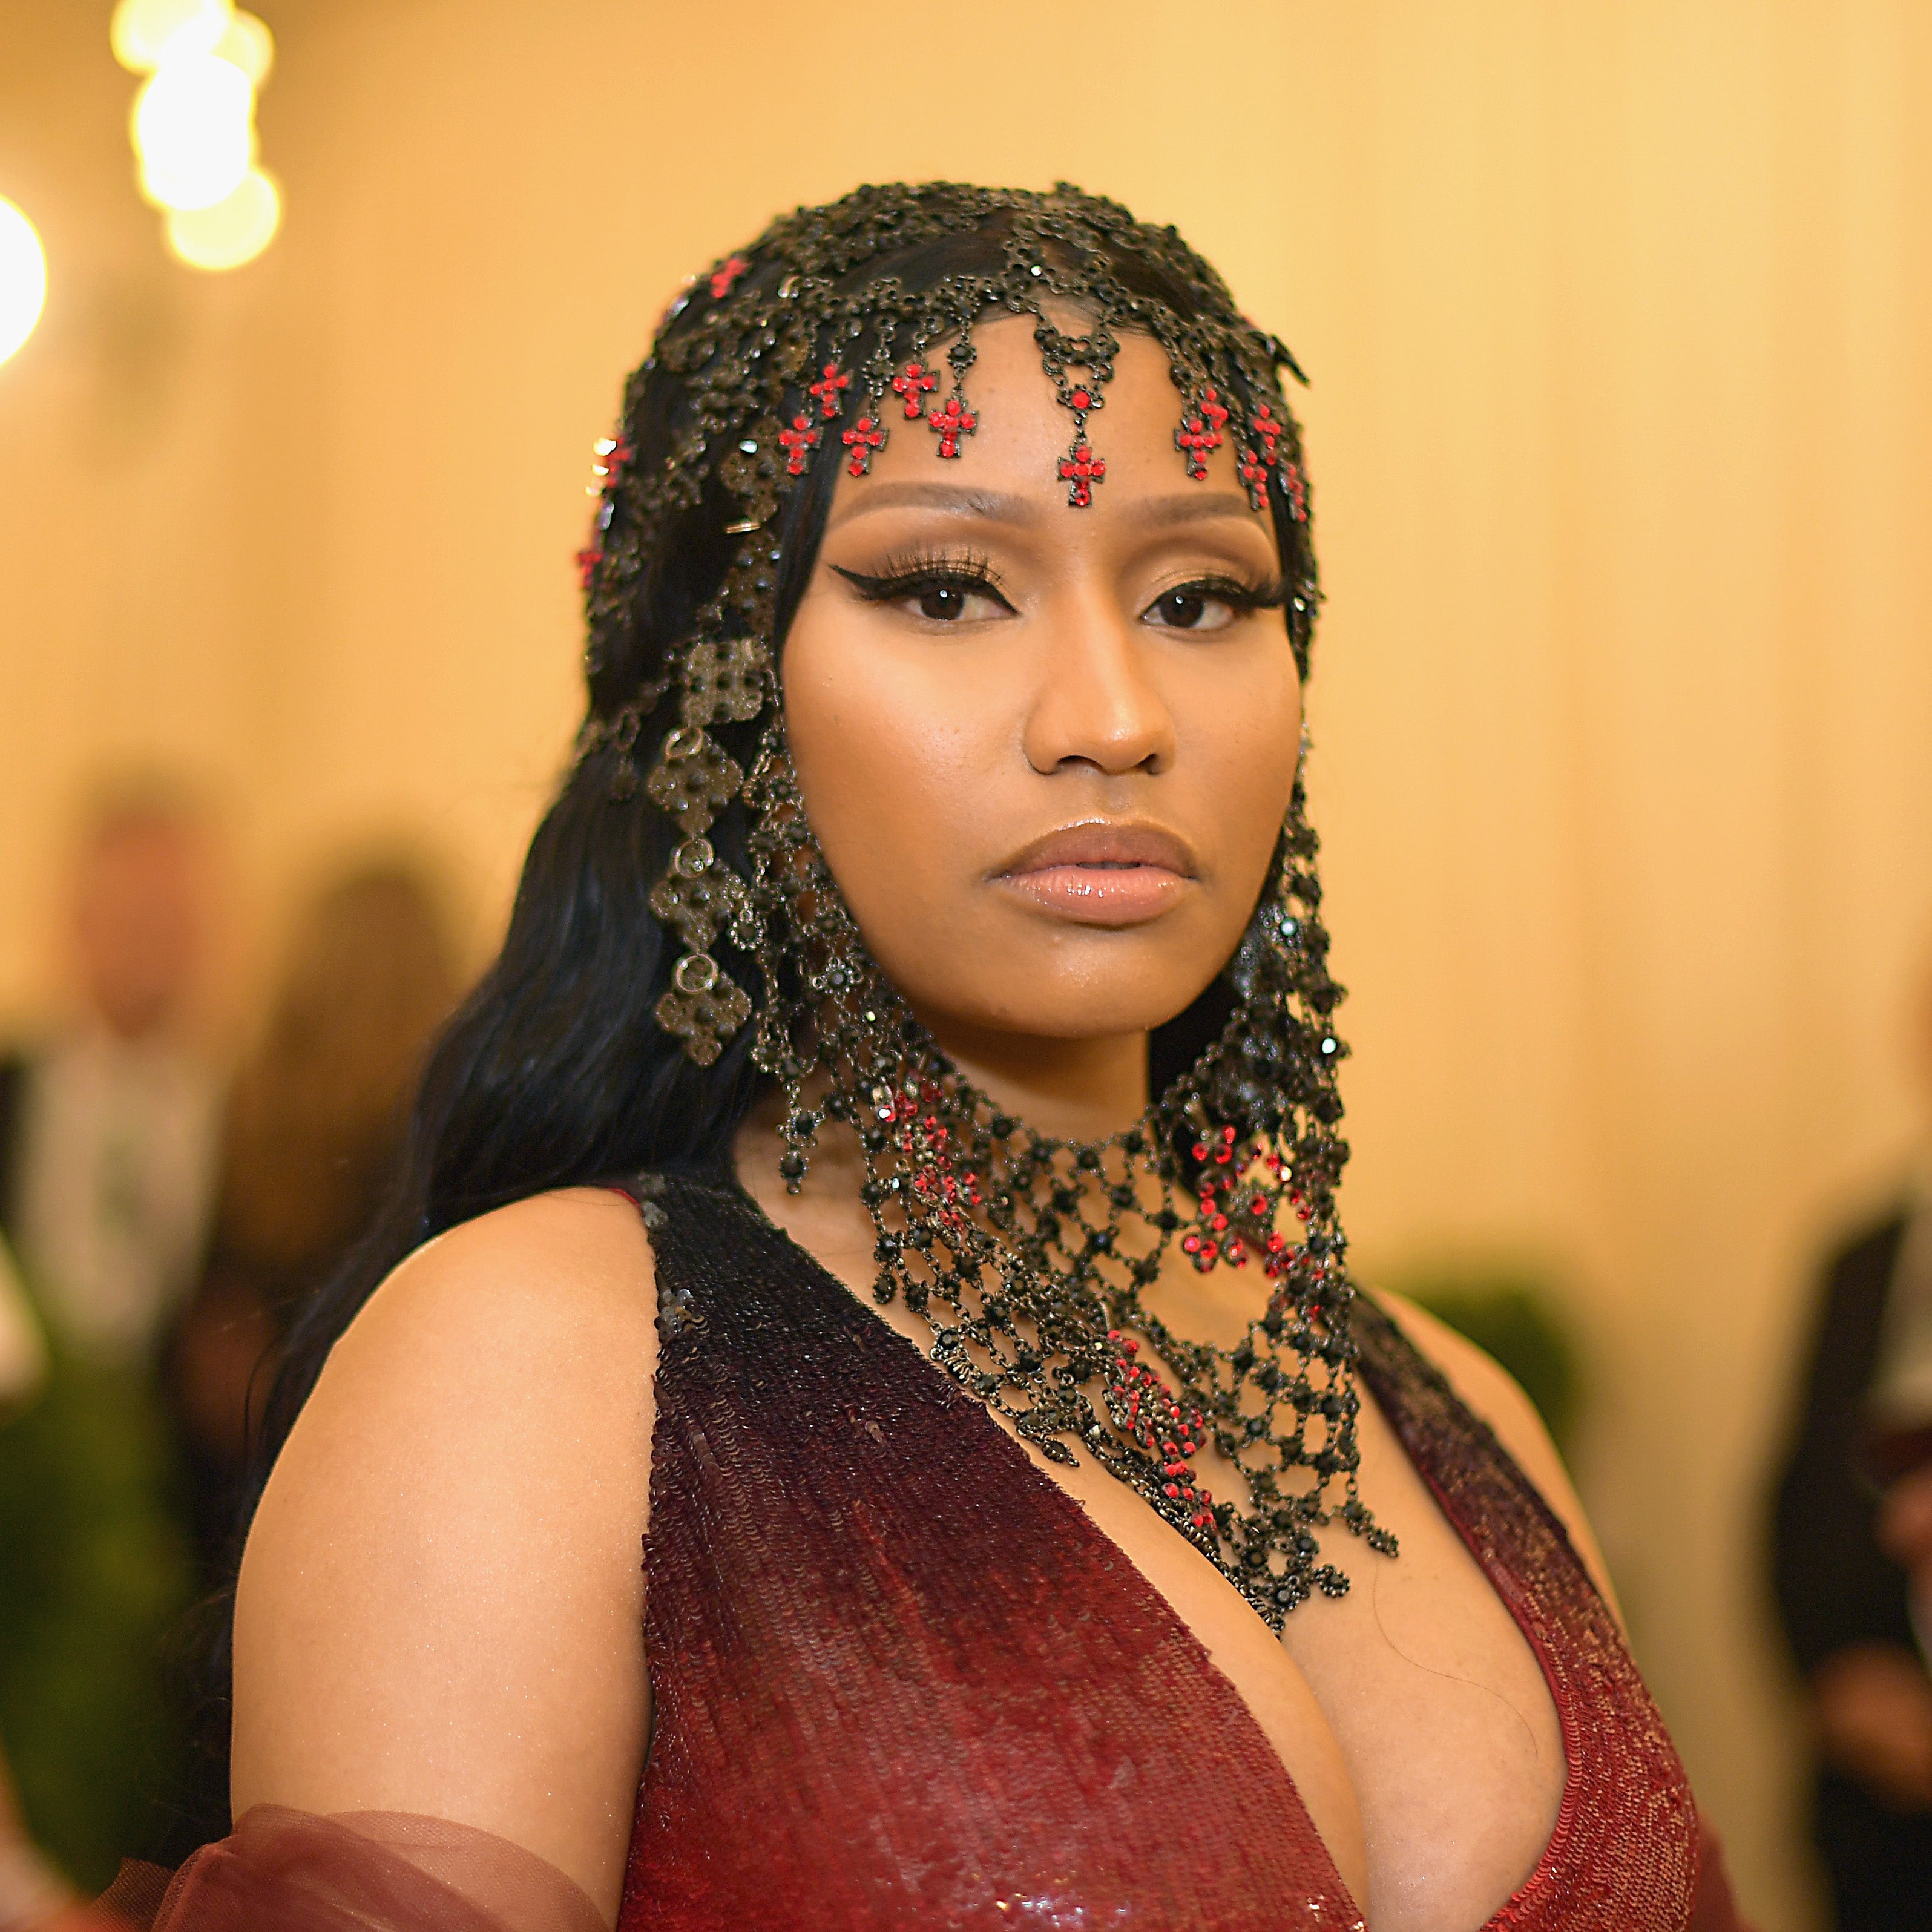 Nicki Minaj Is The Queen Of 'Billboard': Makes History As First Woman With 100 Appearances on Hot 100